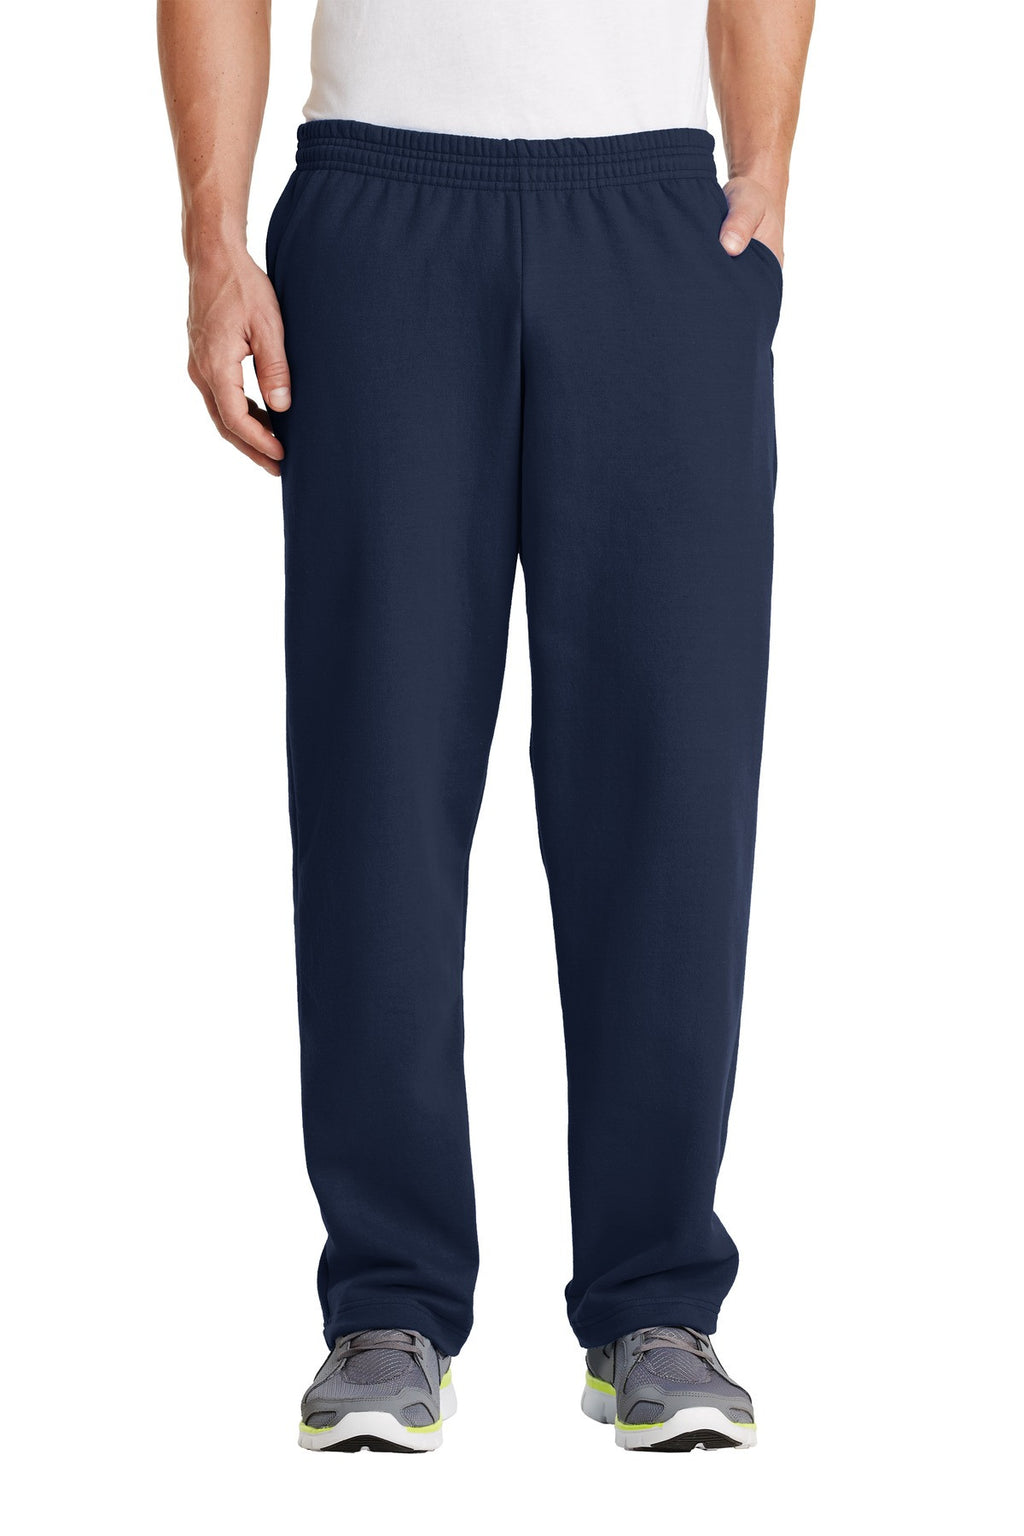 Port & Company Classic Open Bottom Sweatpant With Pockets-4